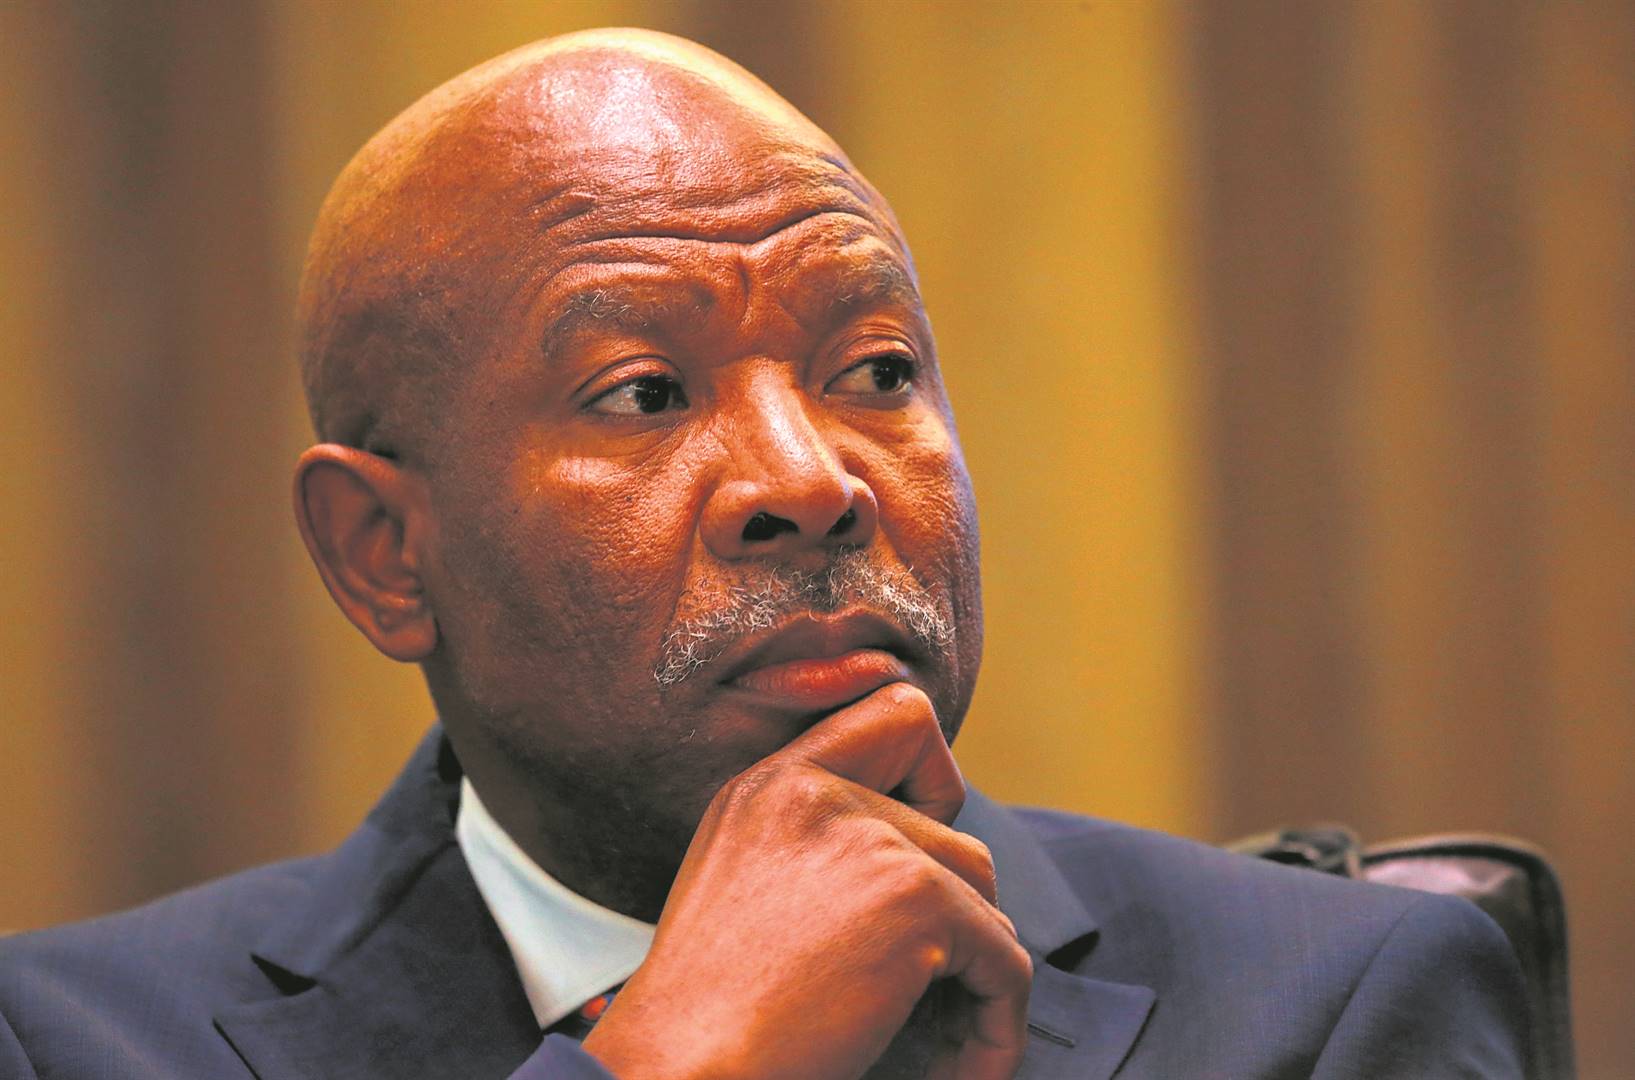 SA Reserve Bank governor Lesetja Kganyago is still cautious in regard to inflation, saying the bank will not hesitate to act should inflation remain stubborn